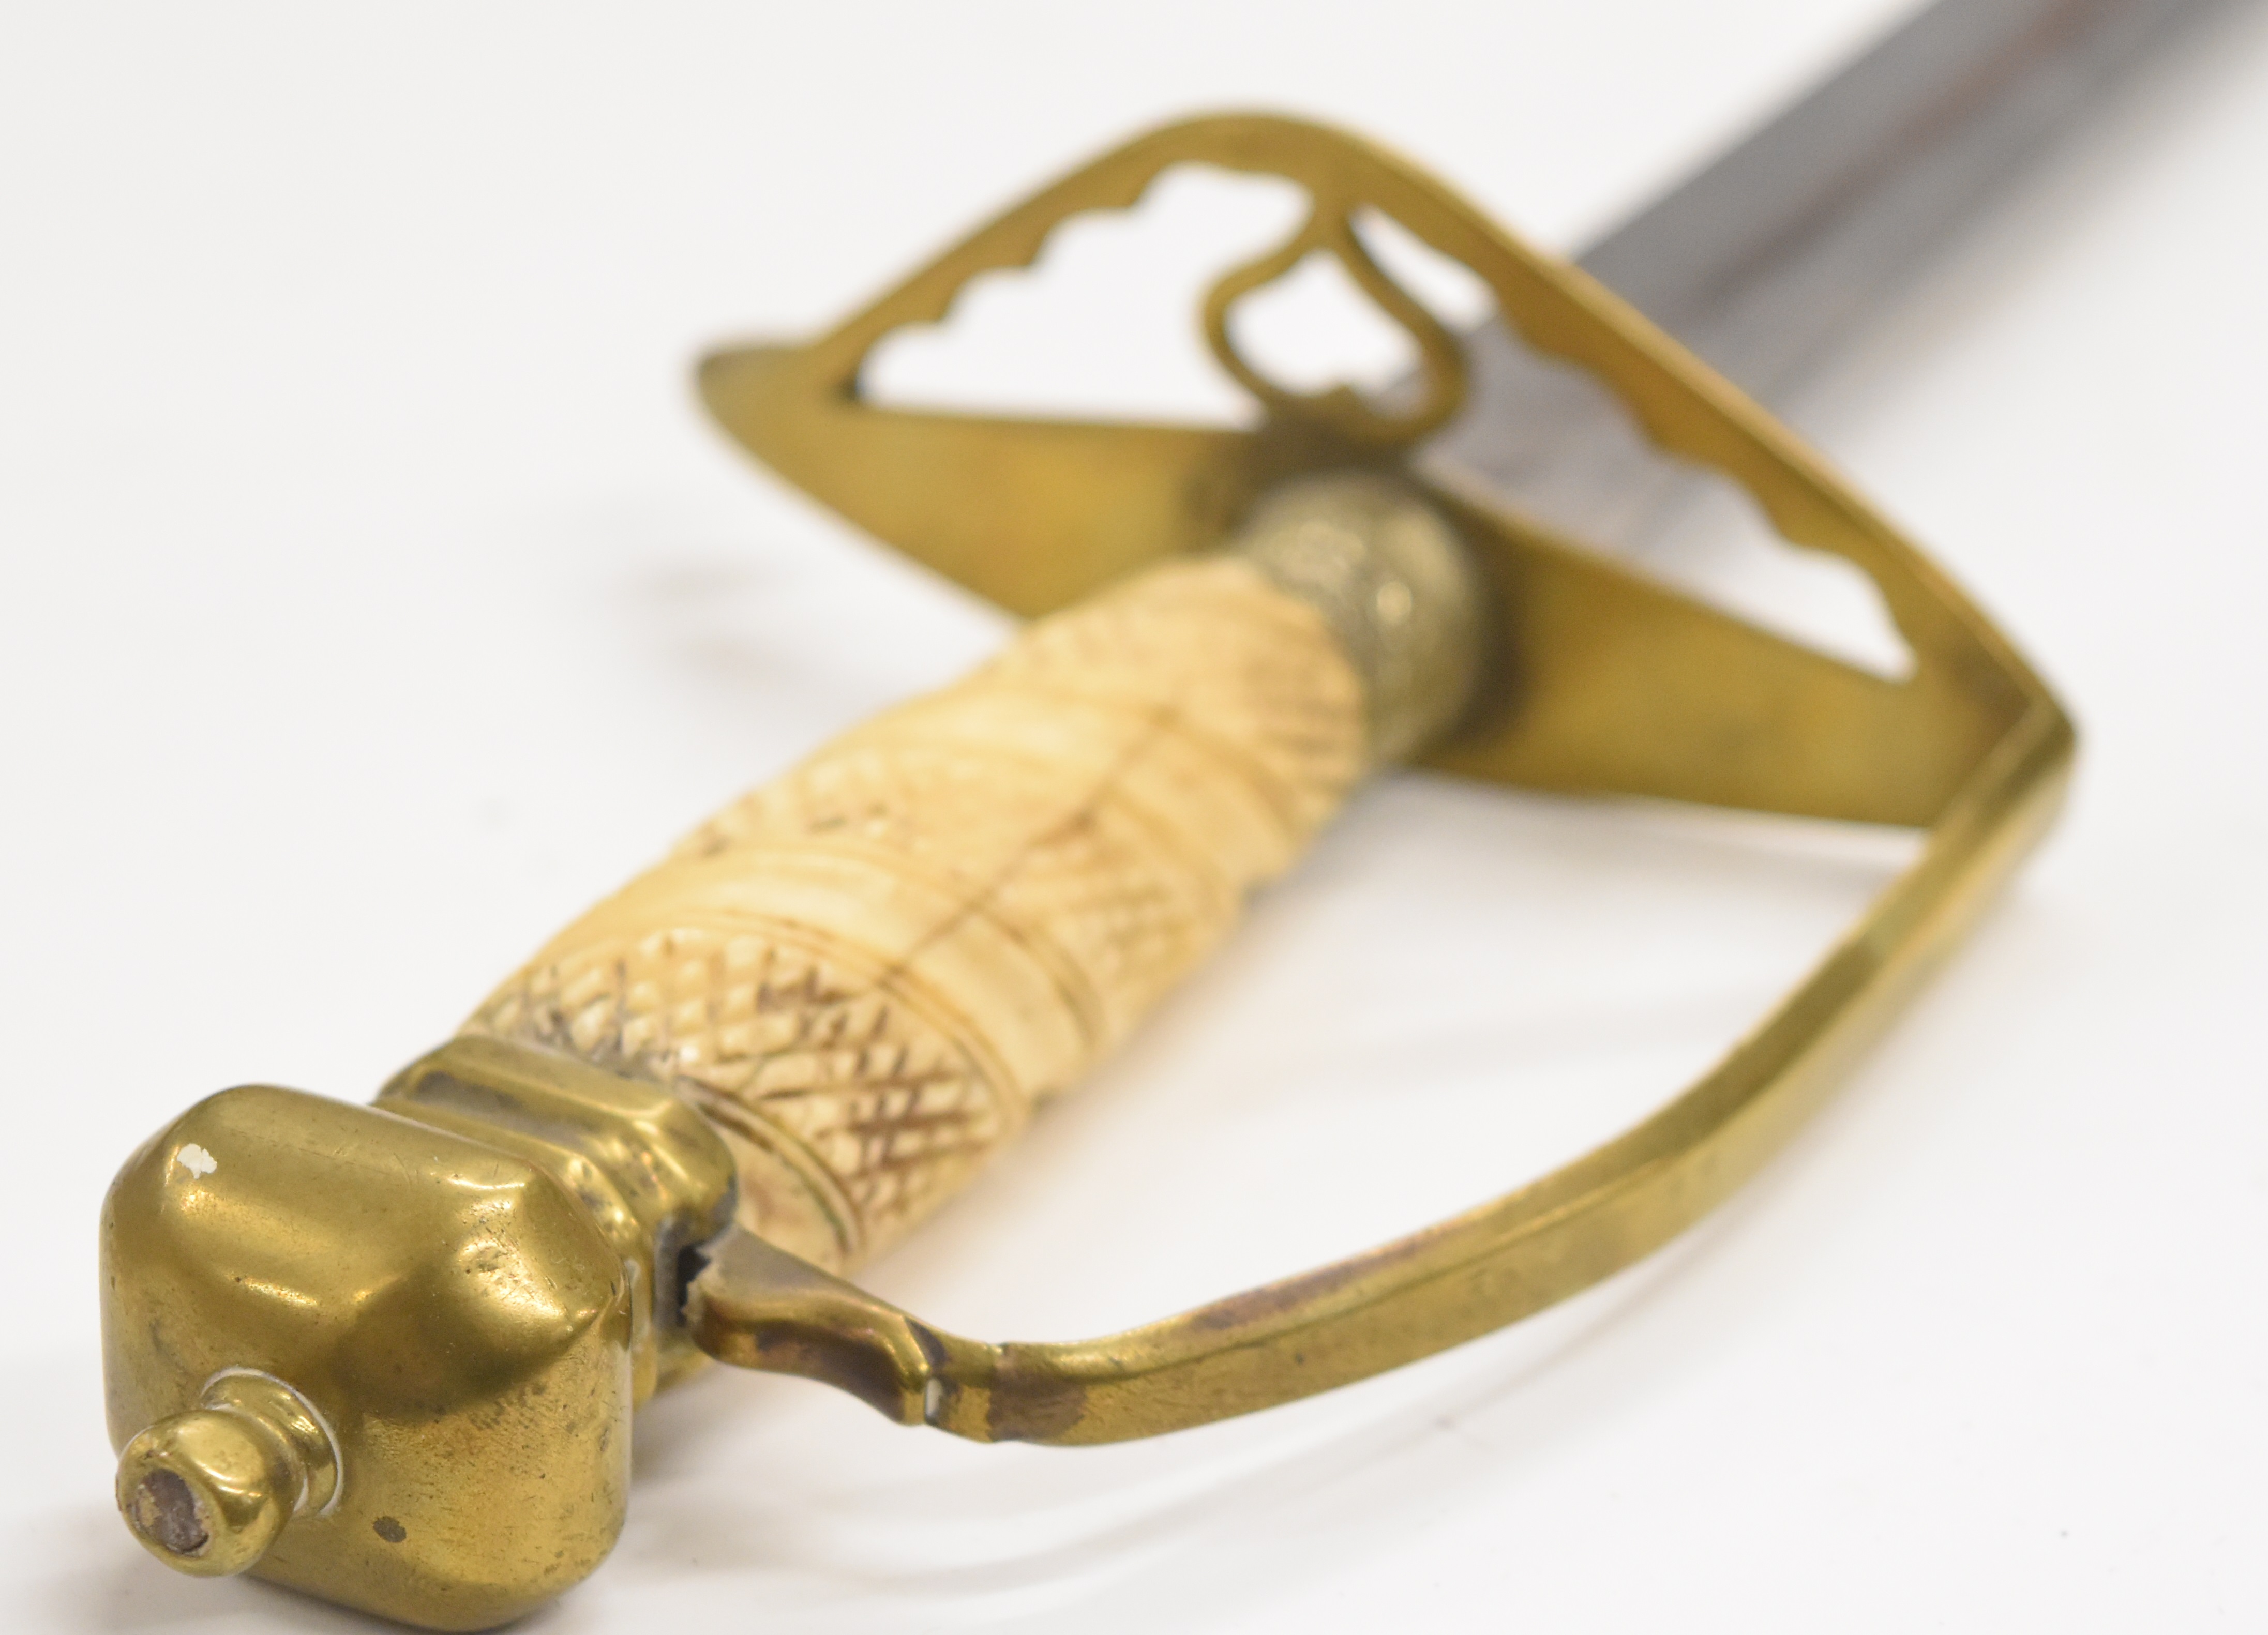 British 1786 pattern Infantry officer's spadroon with bone or similar grip with thistle decoration - Image 5 of 14